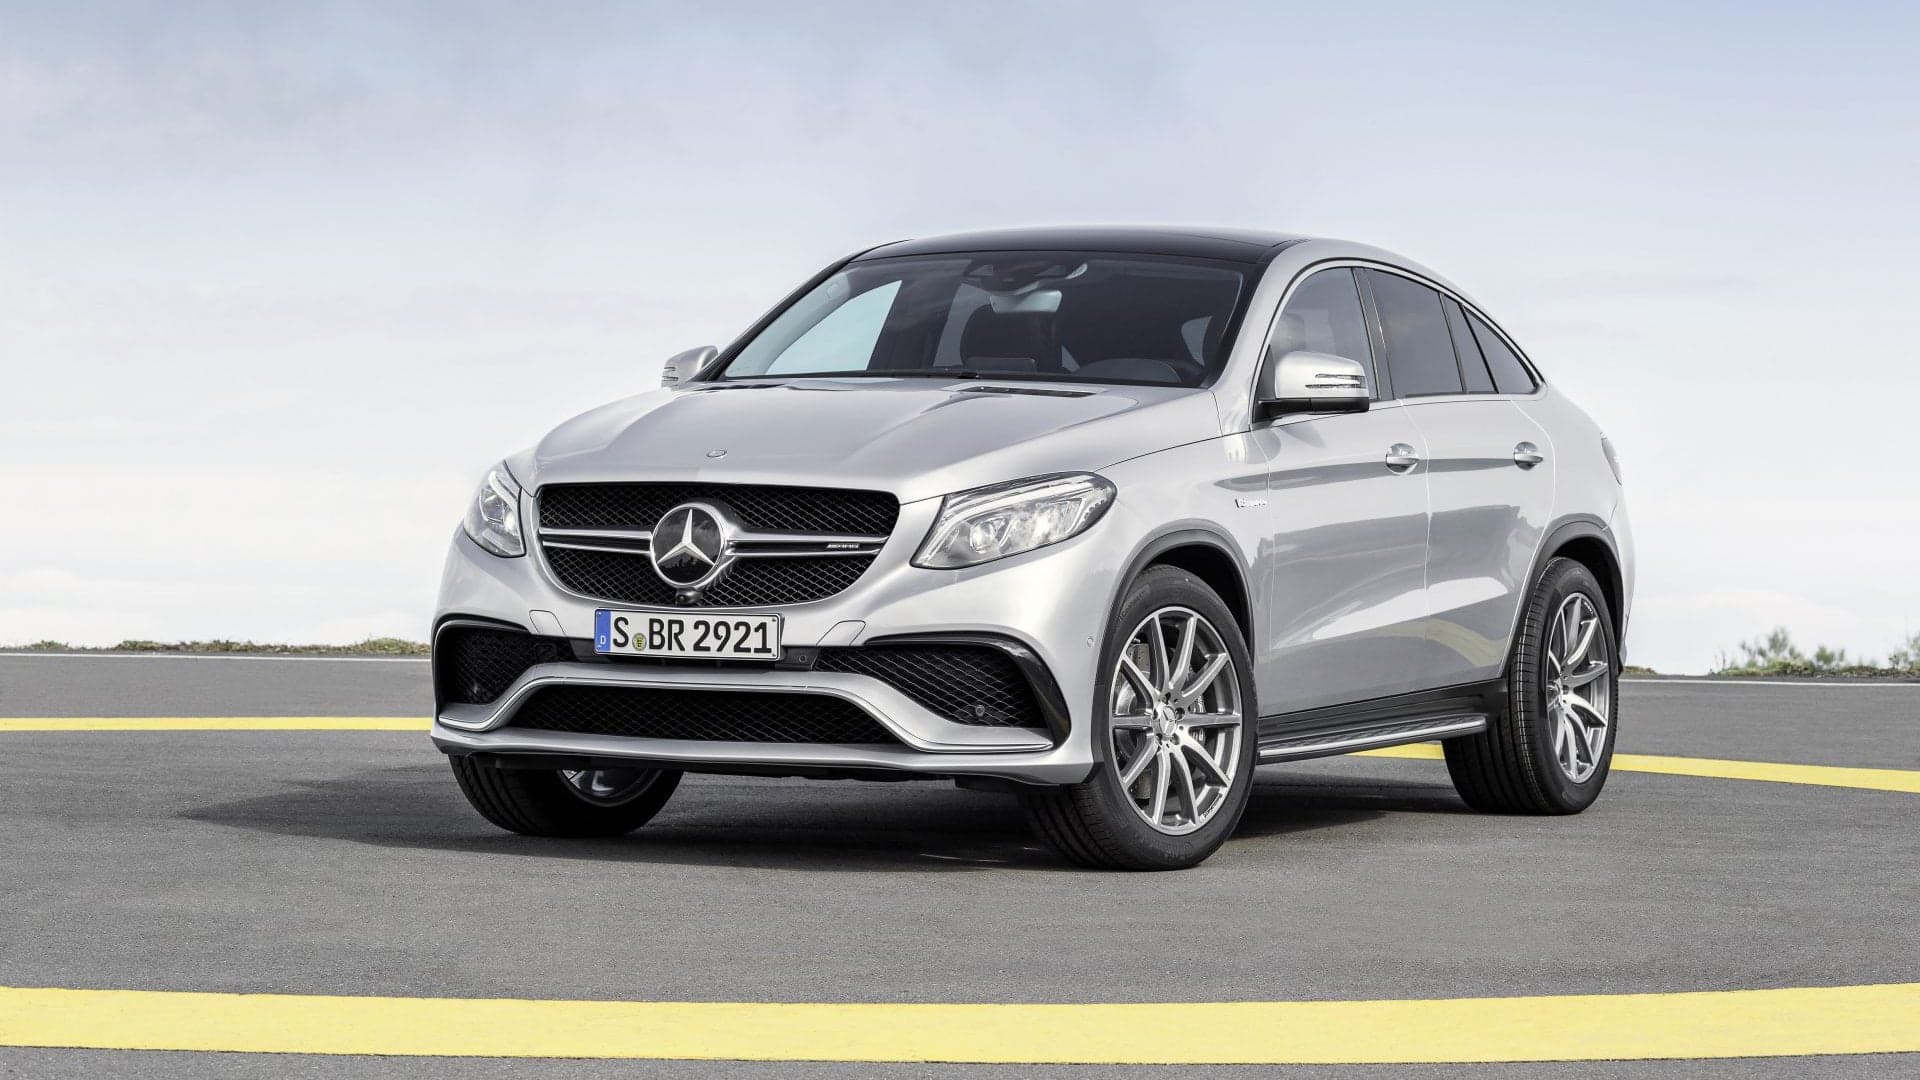 Mercedes-AMG Rules Out a Black Series SUV